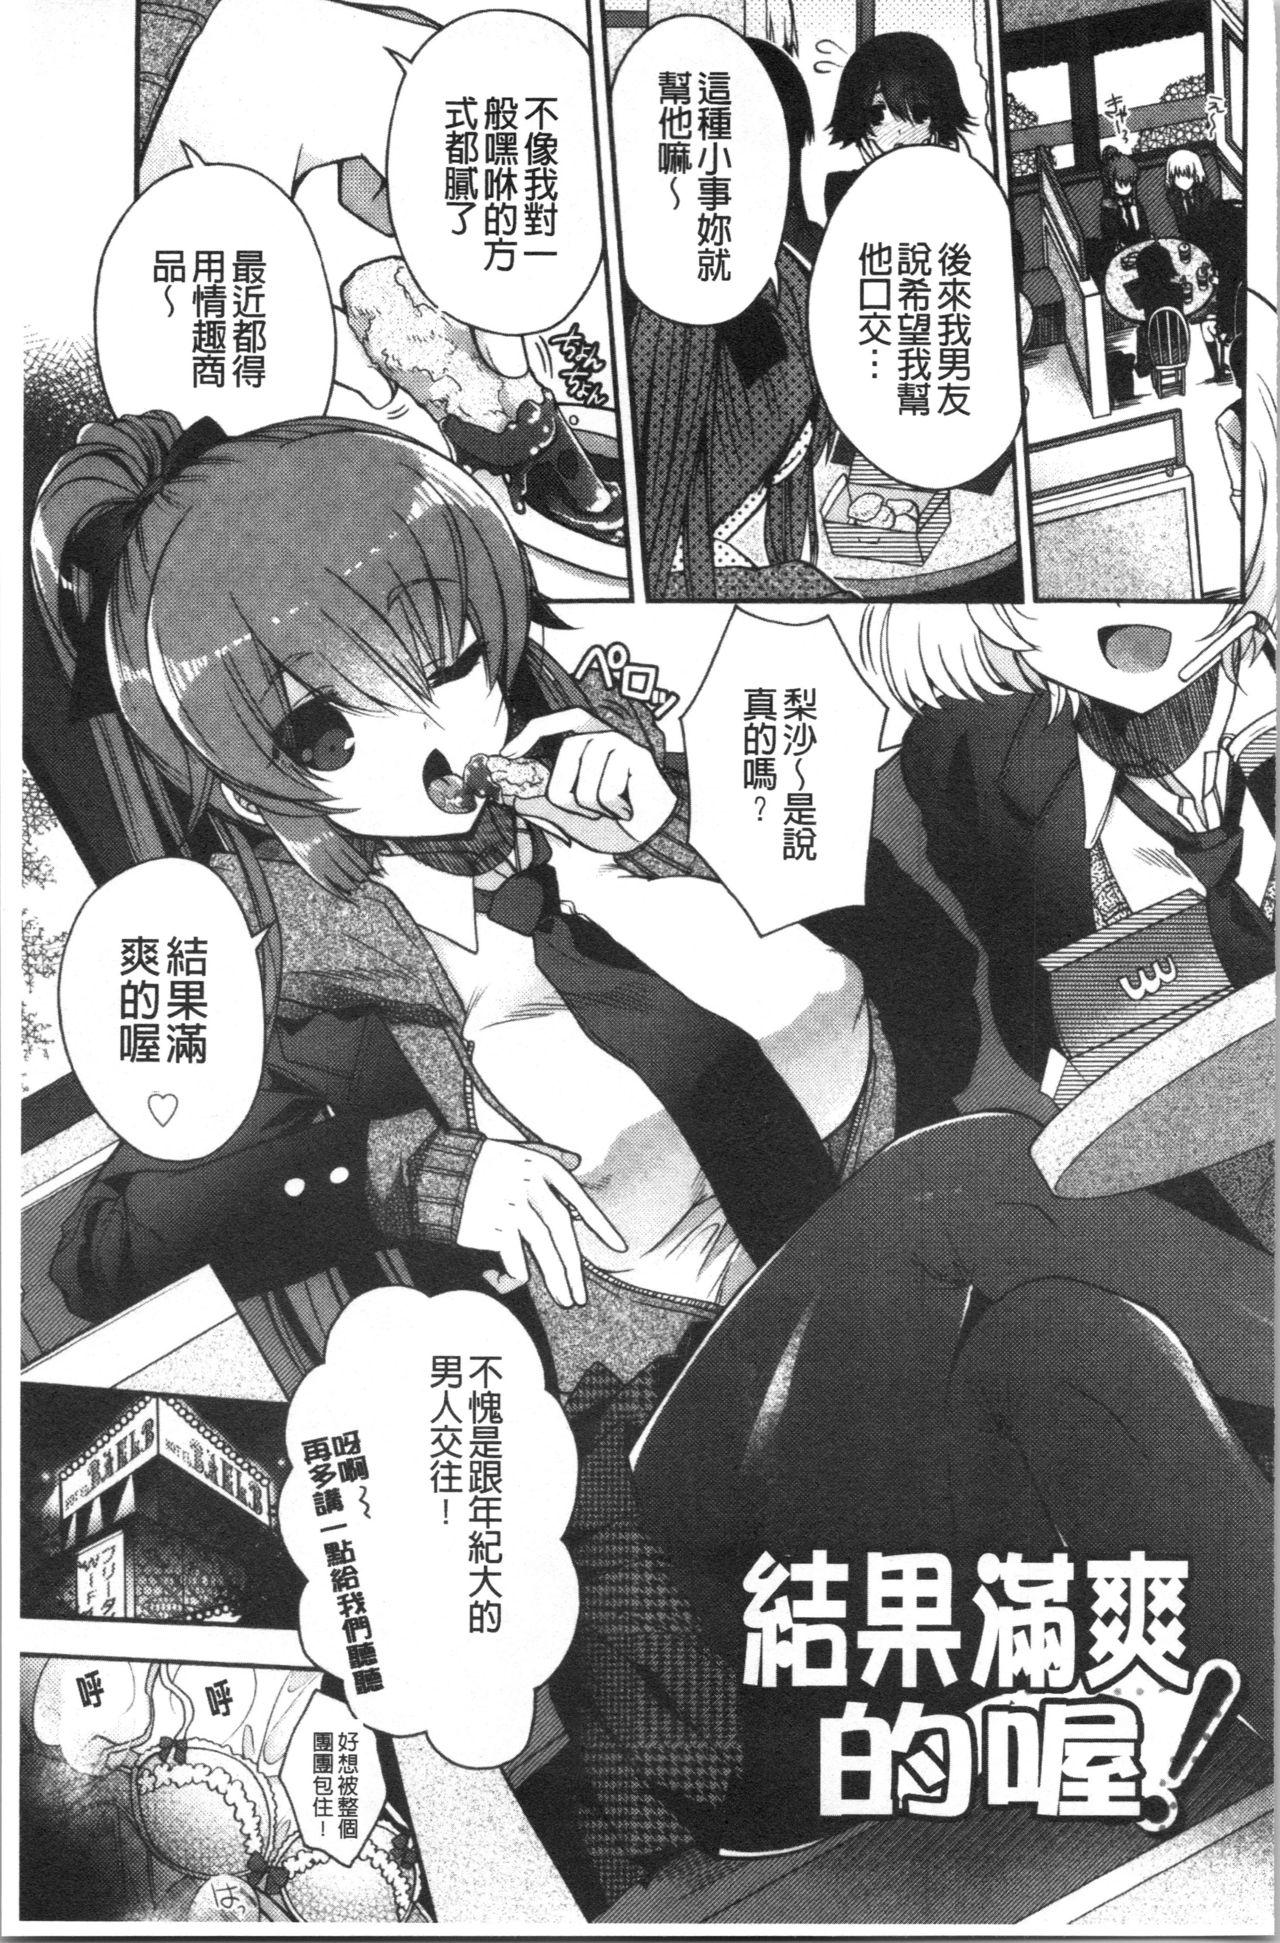 Hatsukoi Melty - Melty First Love 74